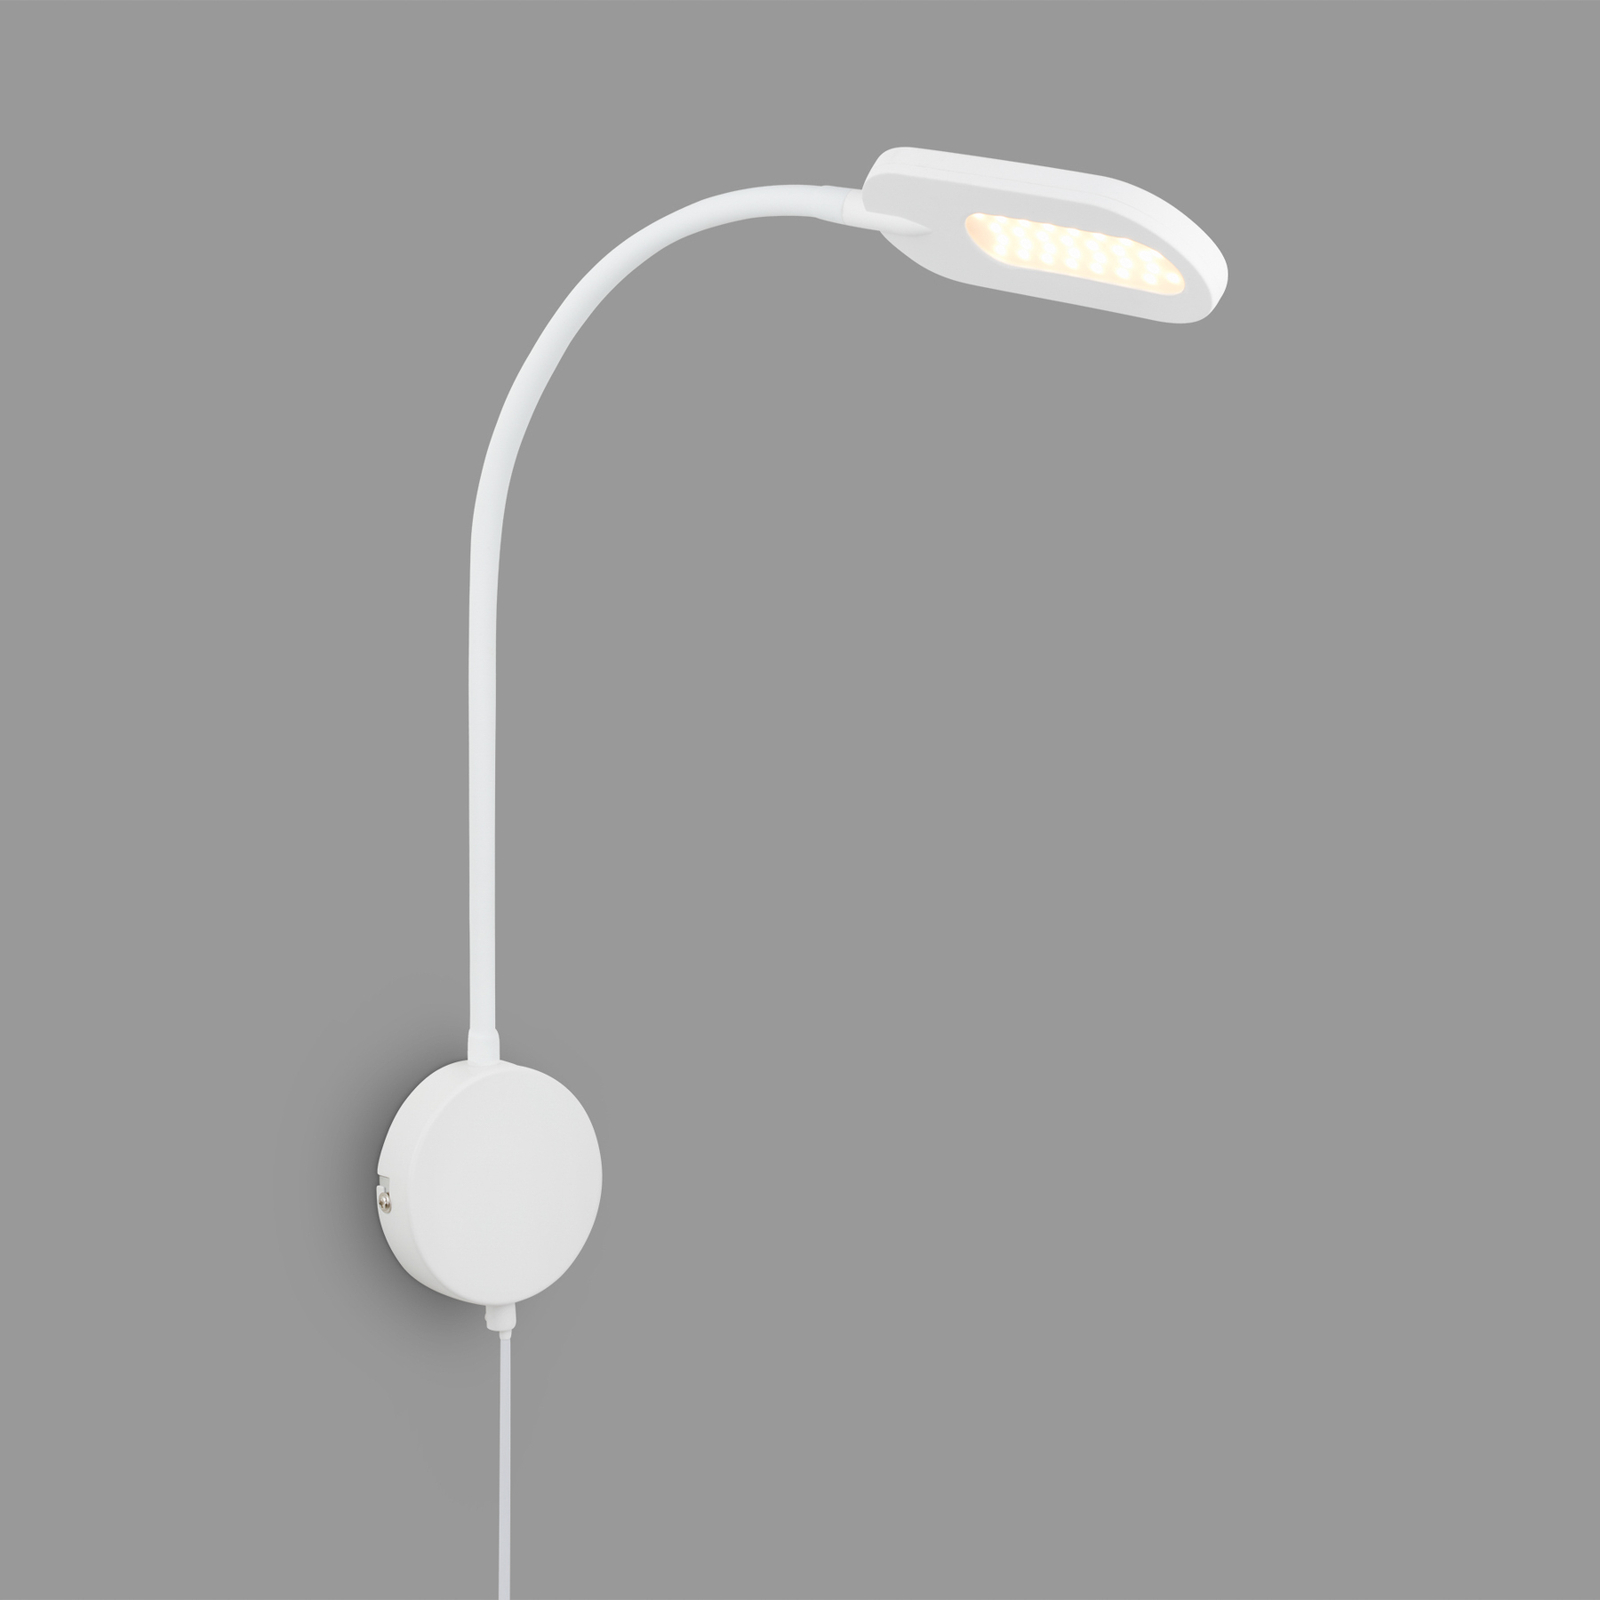 Applique a LED 2177016 con dimmer, bianco